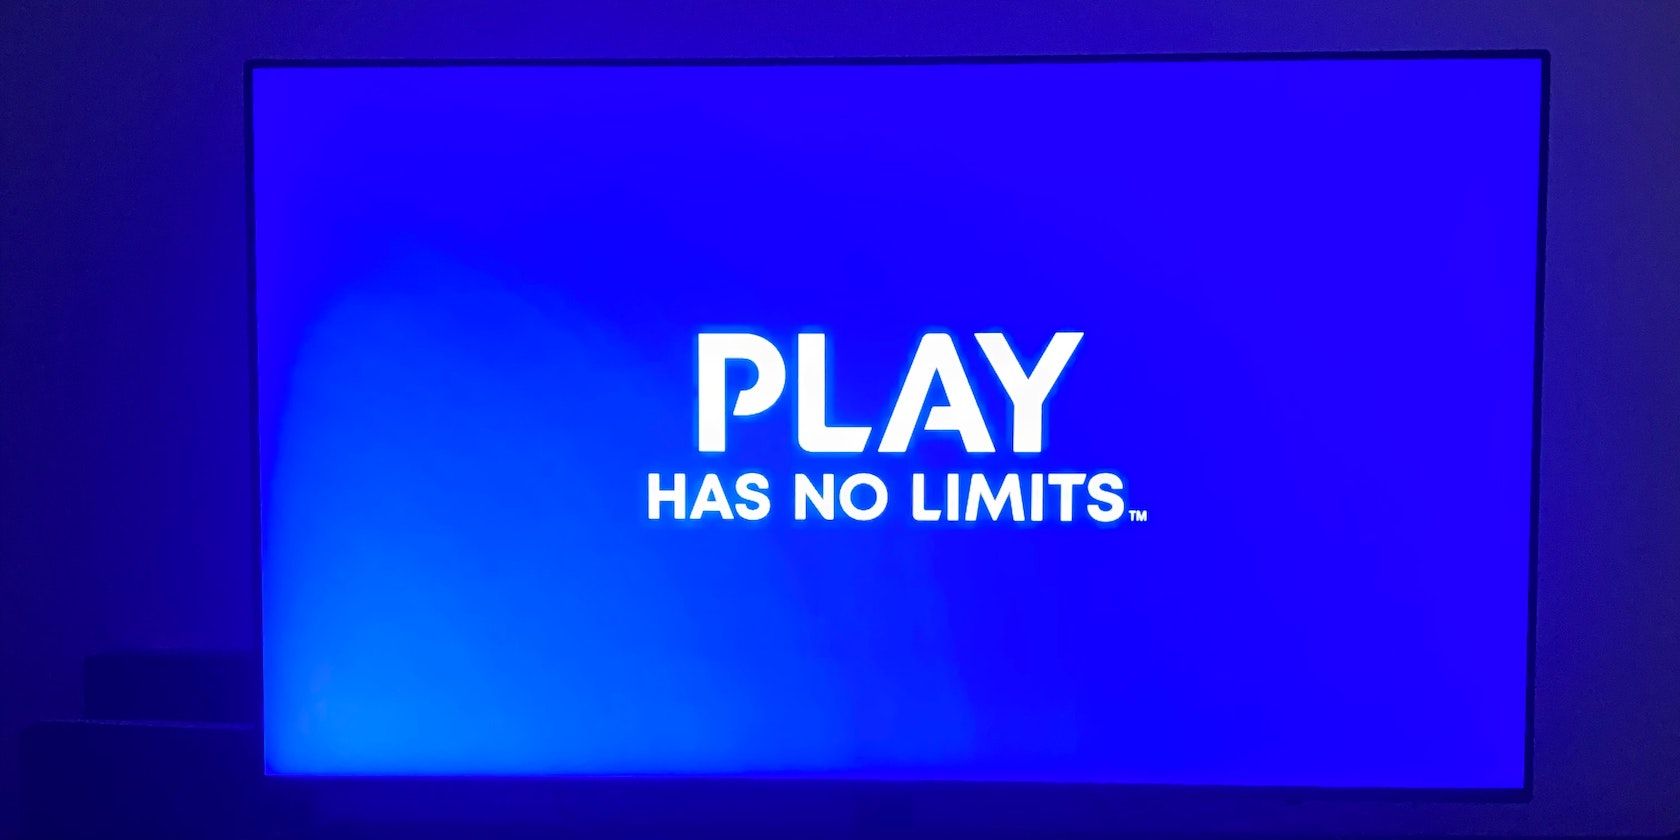 A blue screen displaying the message 